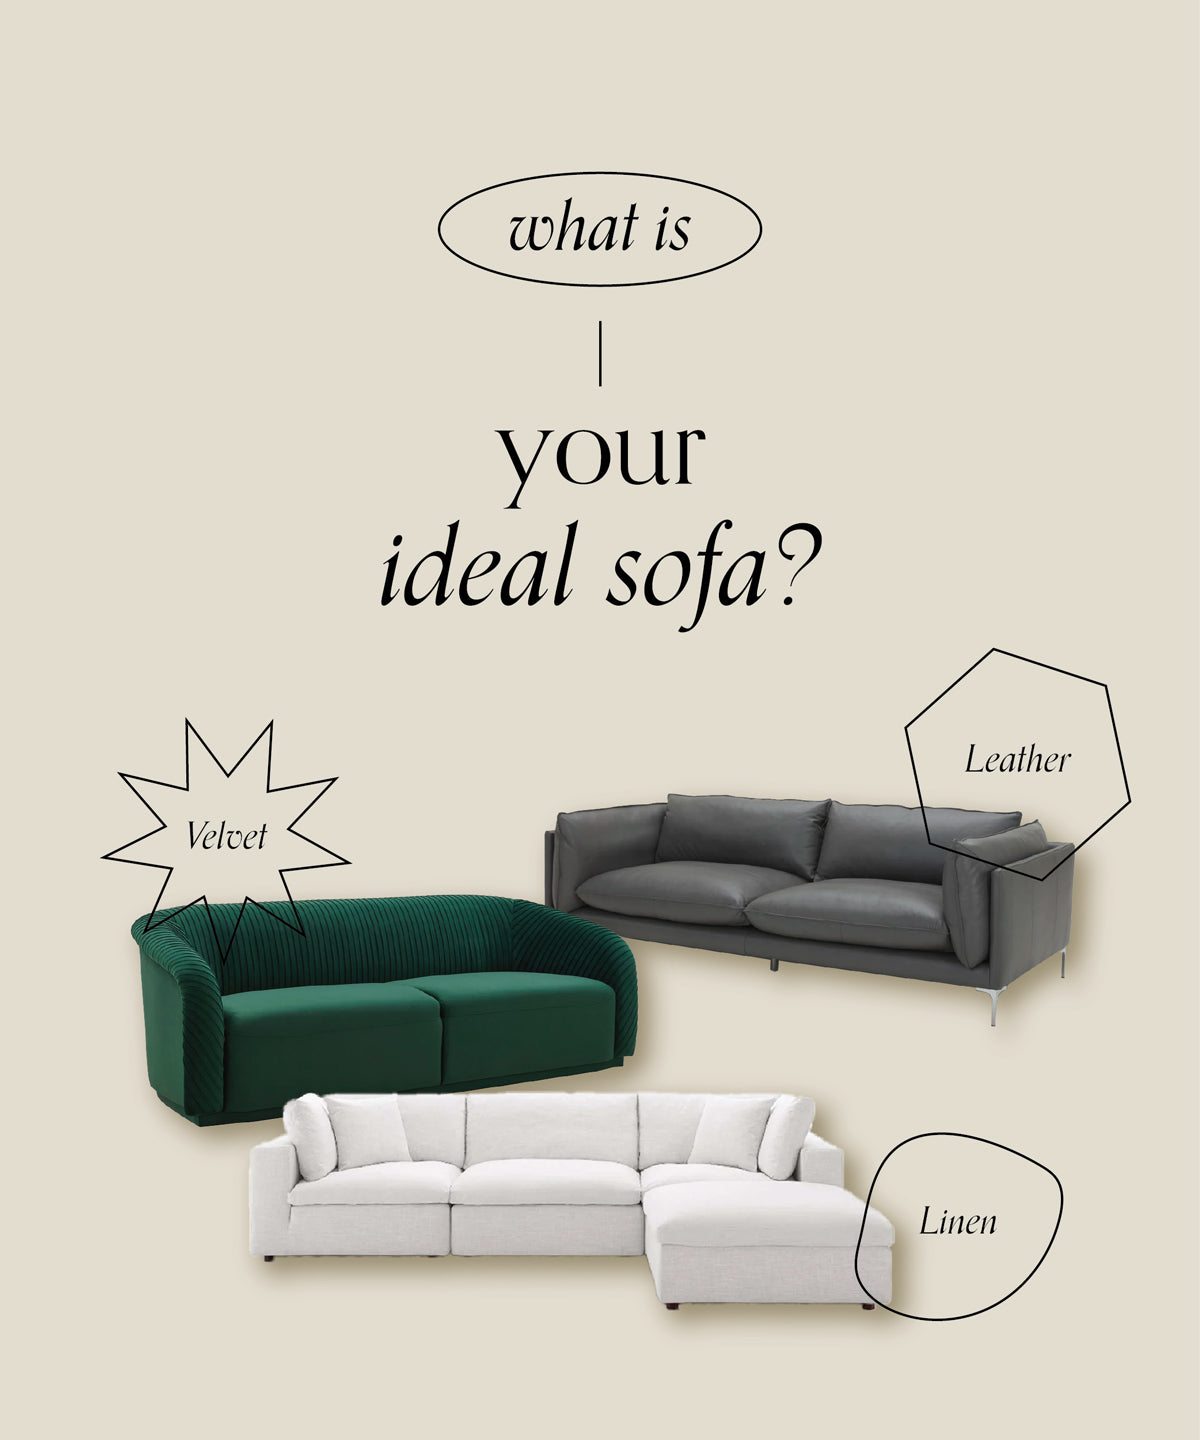 What is your ideal sofa?